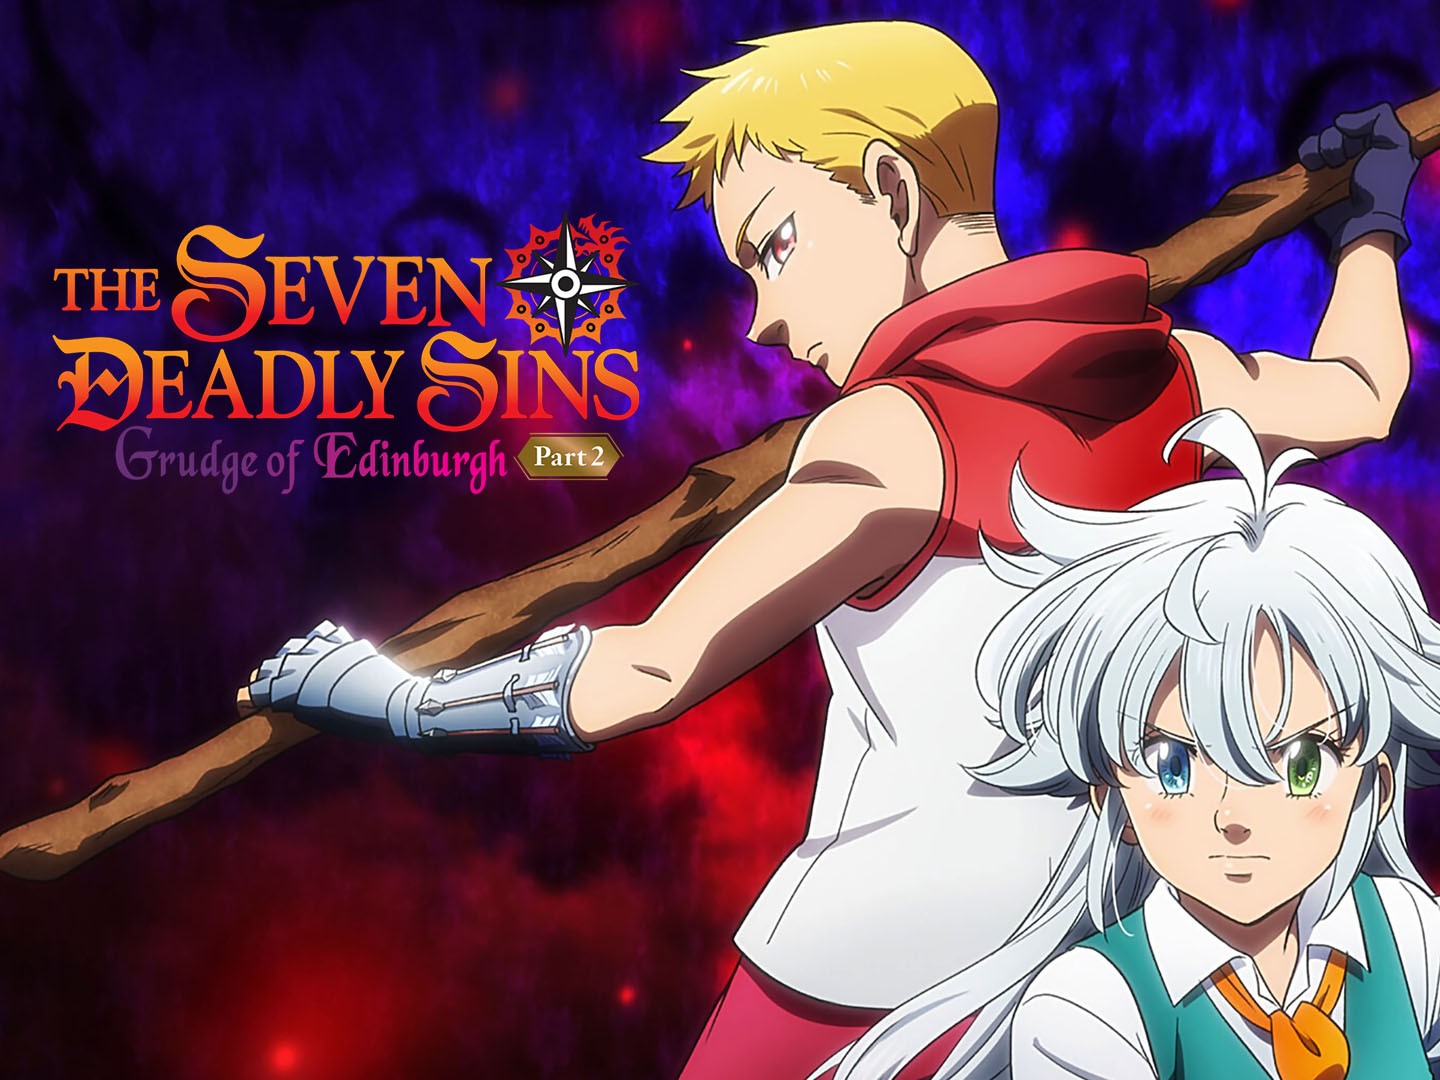 The Seven Deadly Sins: Grudge of Edinburgh Part 2 Debuts on August